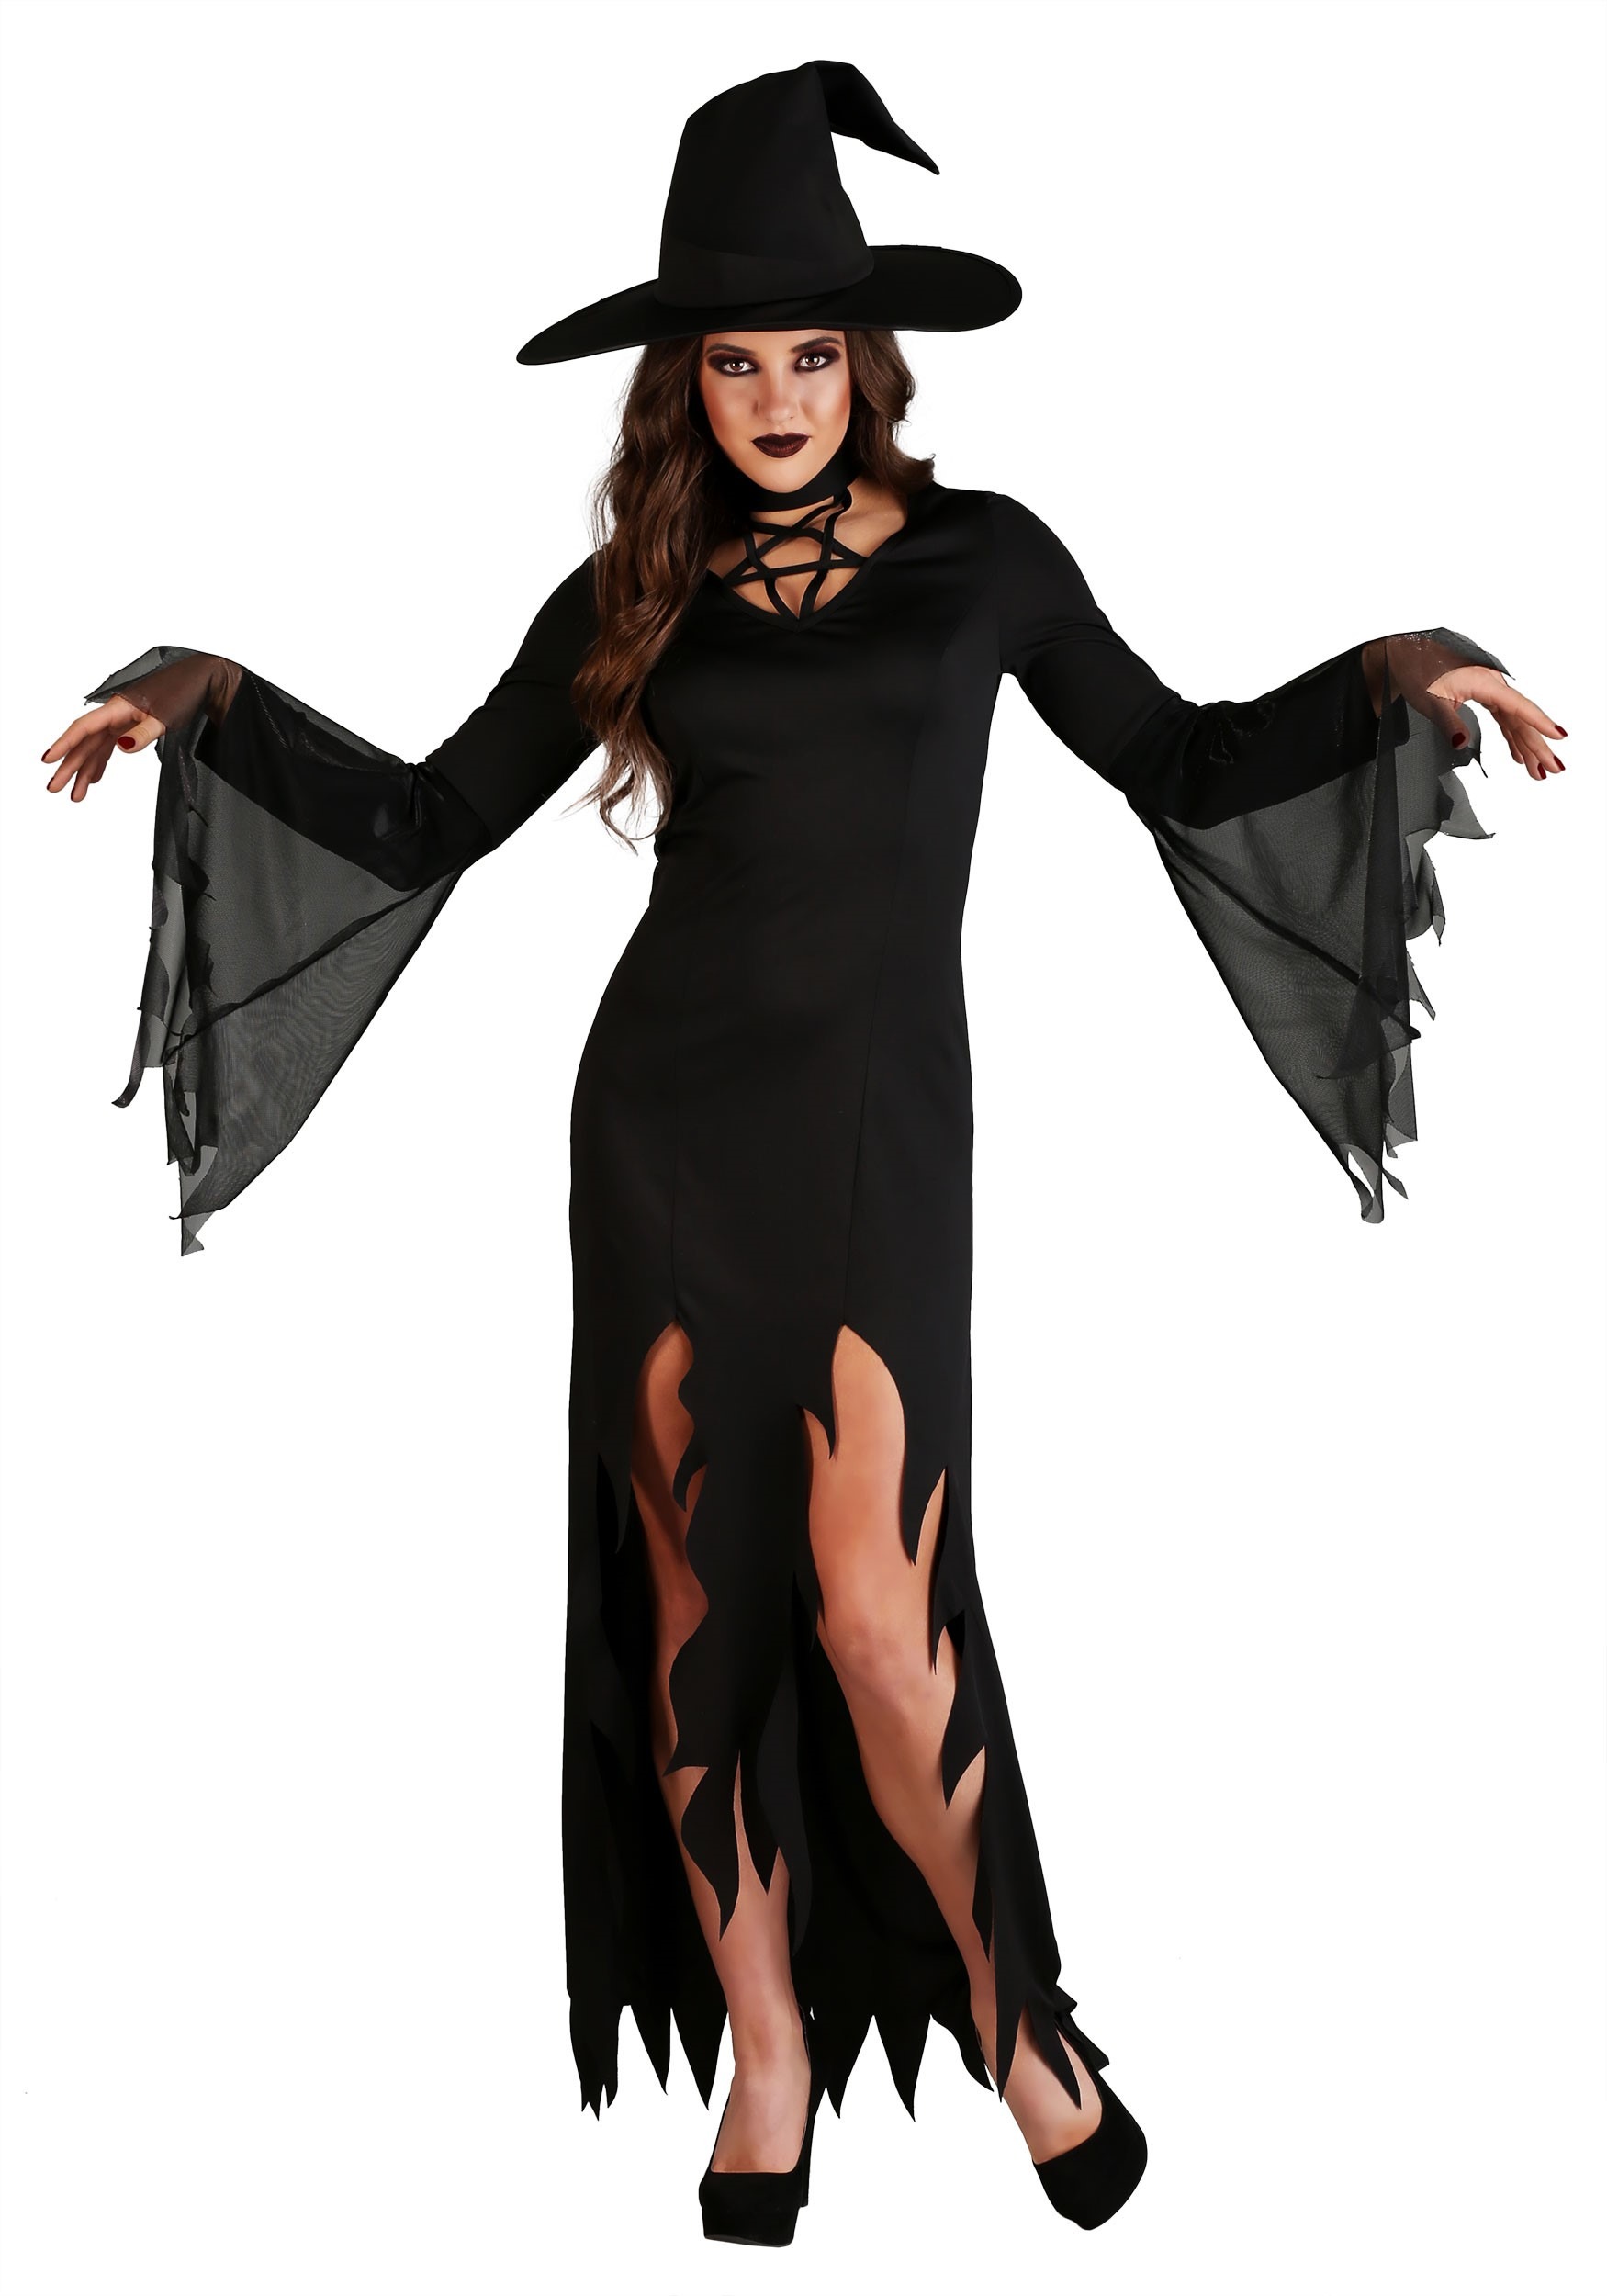 Photos - Fancy Dress FUN Costumes Coven Countess Witch Costume for Women | Witch Costumes Black